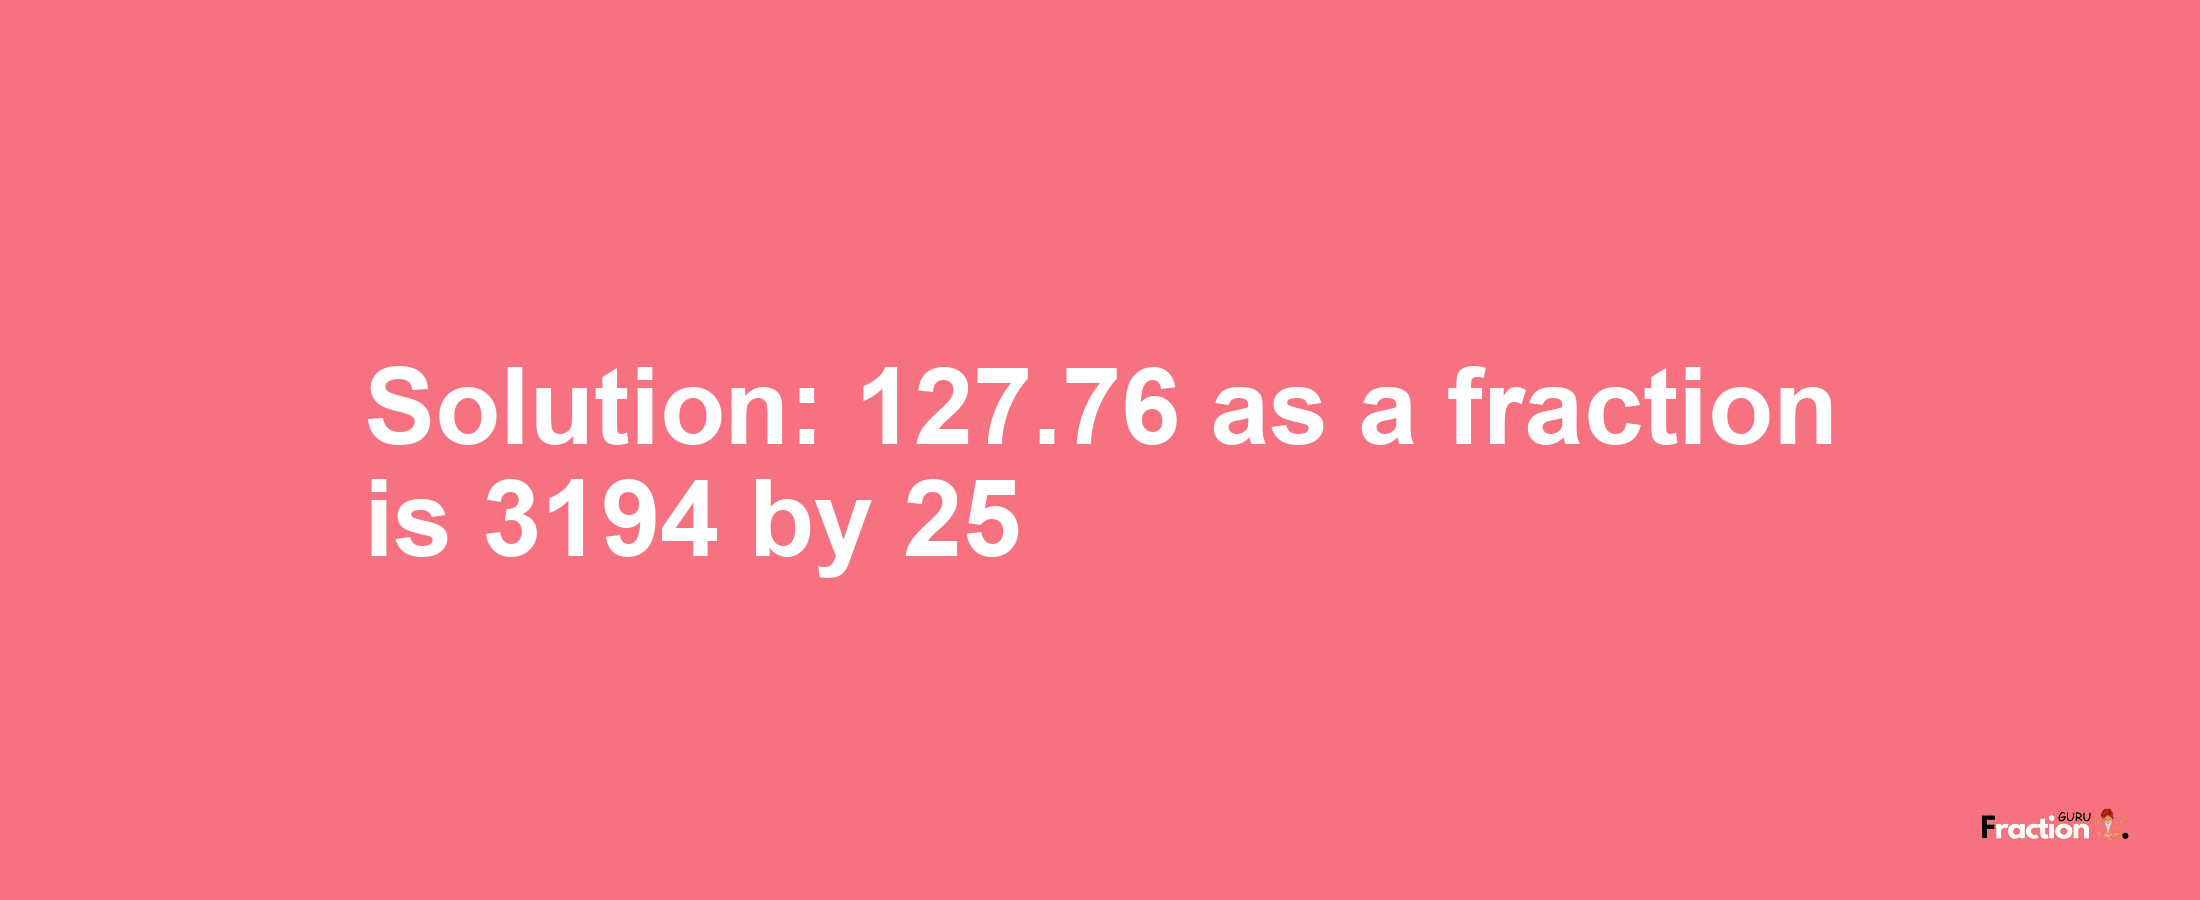 Solution:127.76 as a fraction is 3194/25